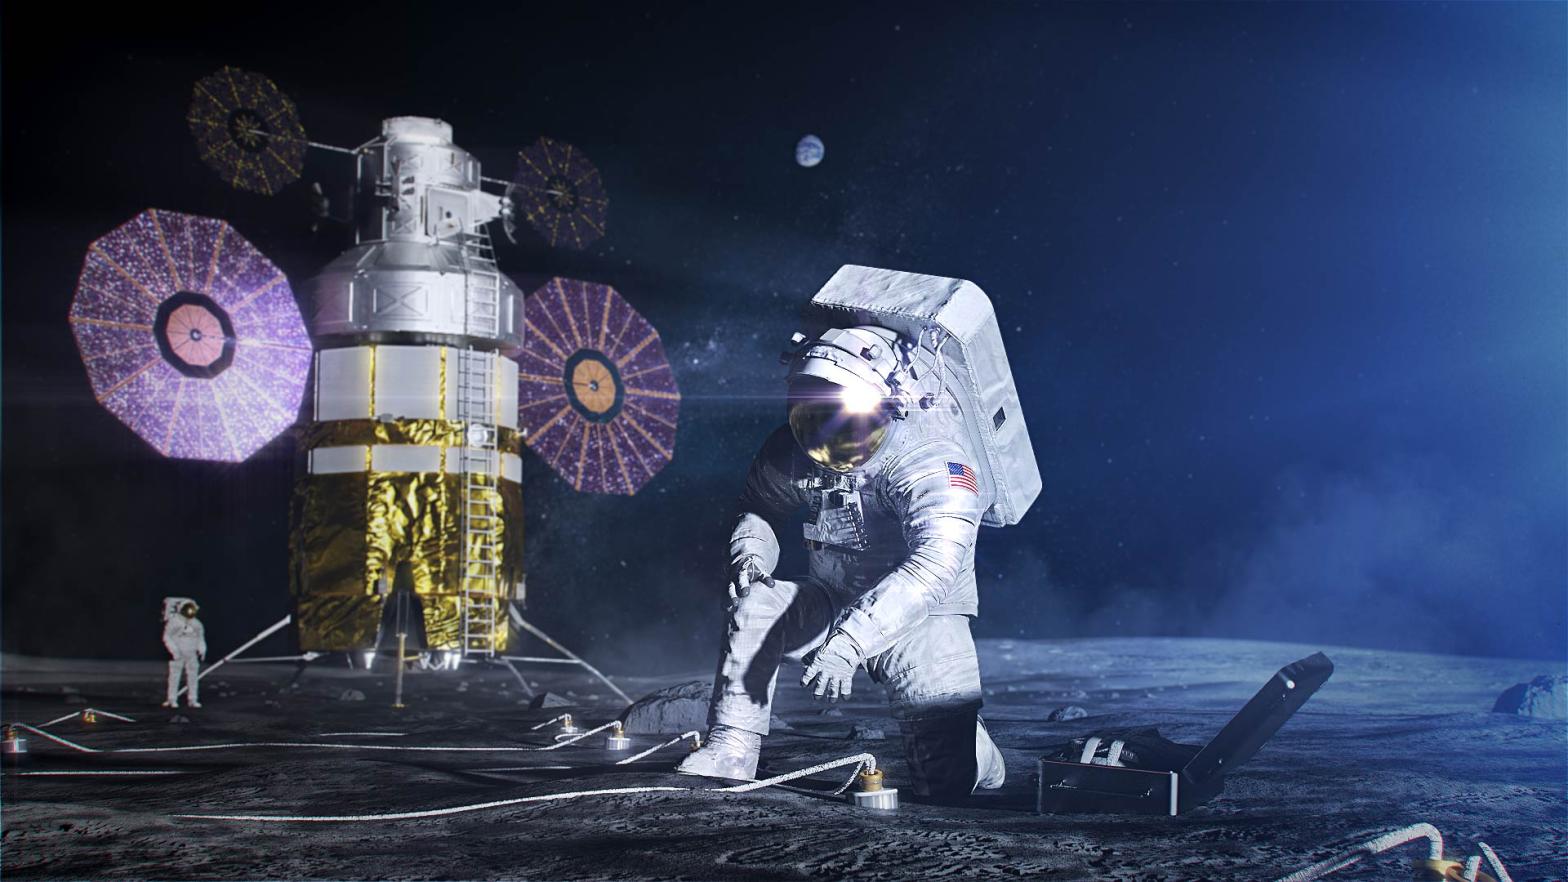 Artist's conception of an Artemis crew working on the Moon. (Image: NASA)